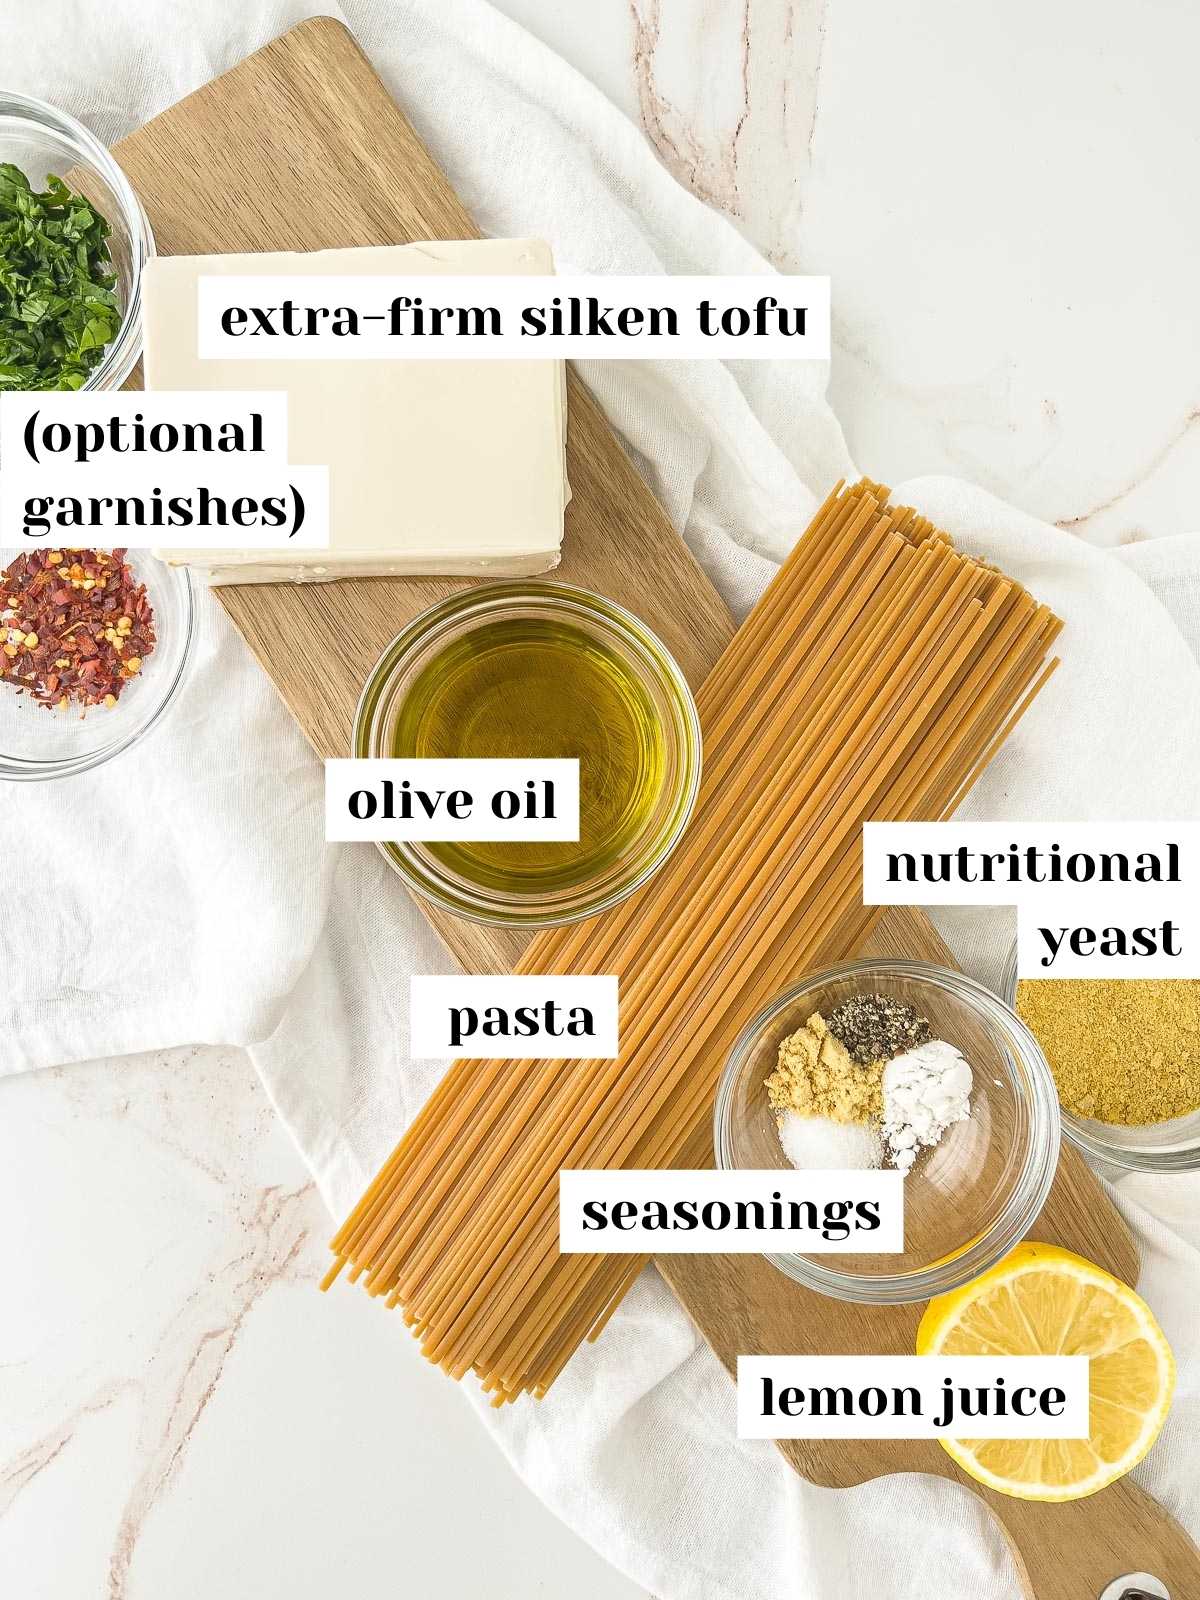 Labeled ingredients for the pasta sauce.